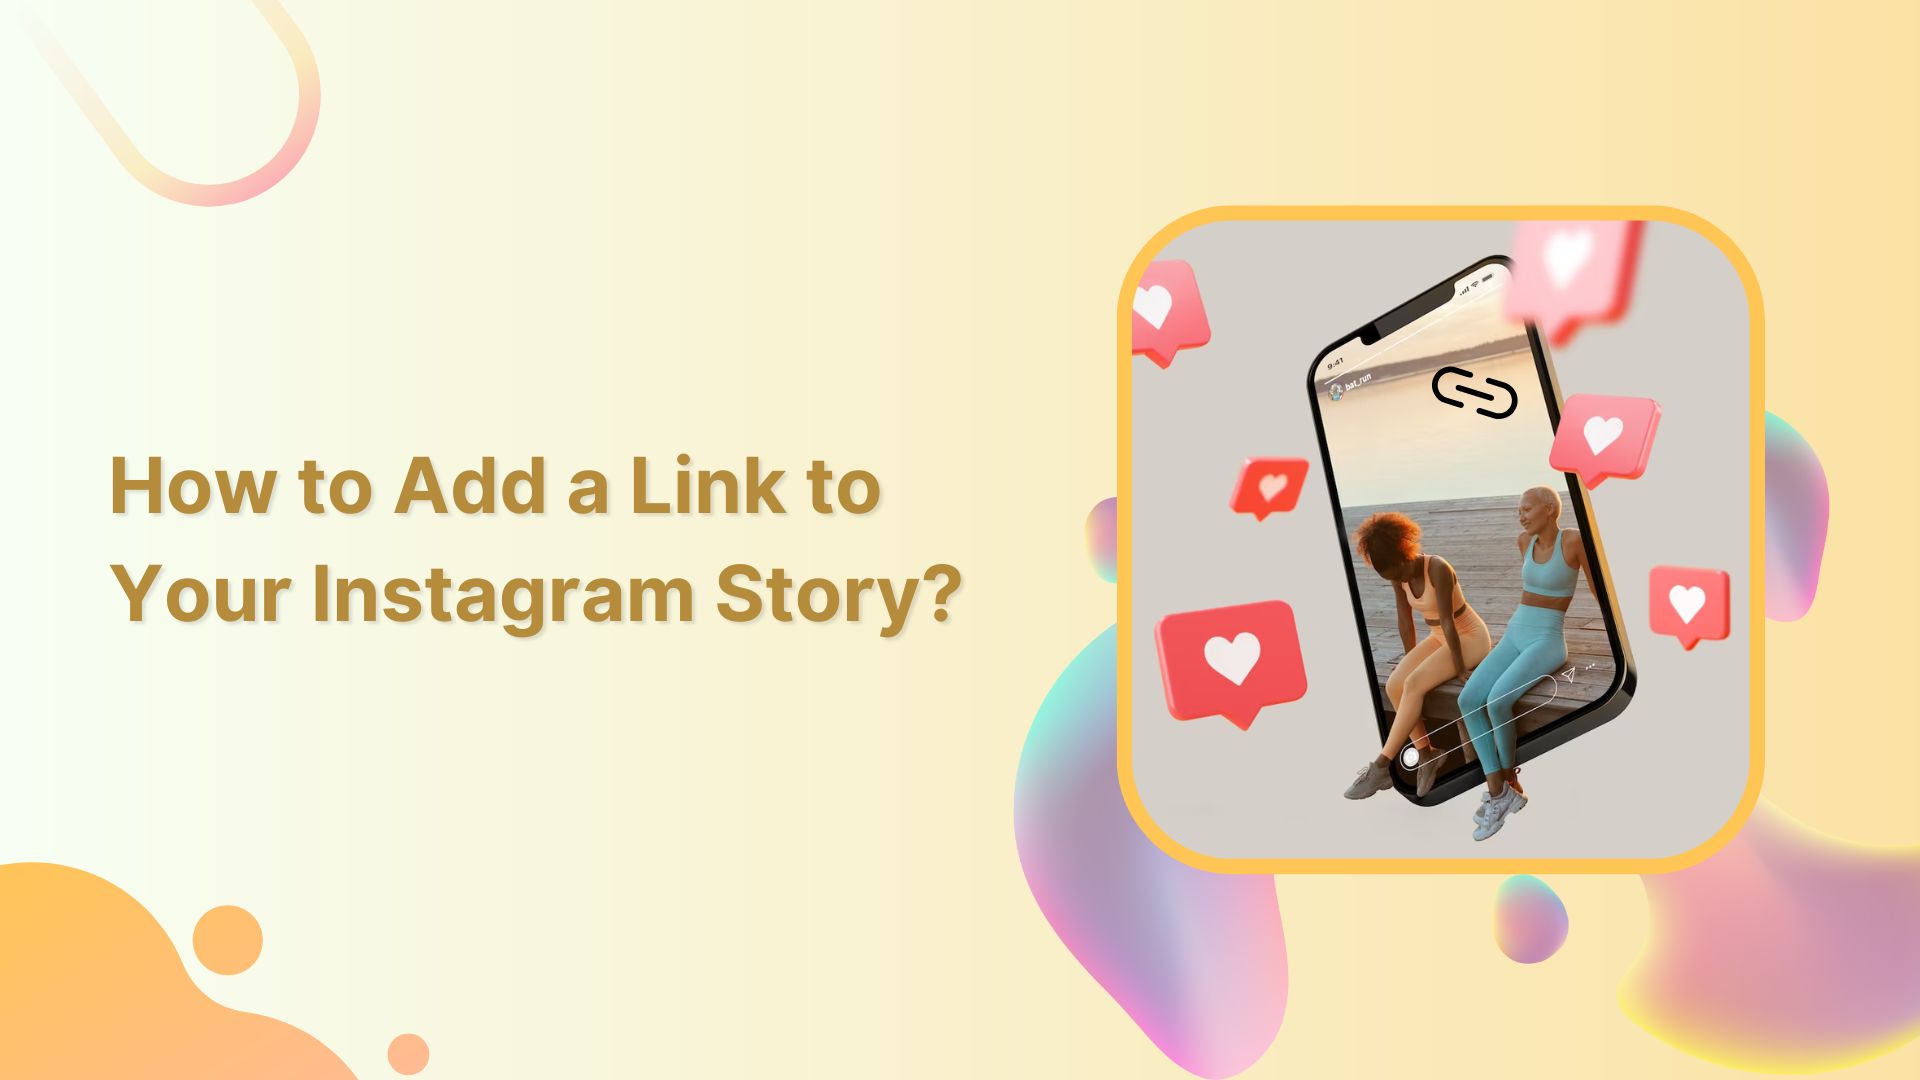 How to Add a Link to Your Instagram Story?